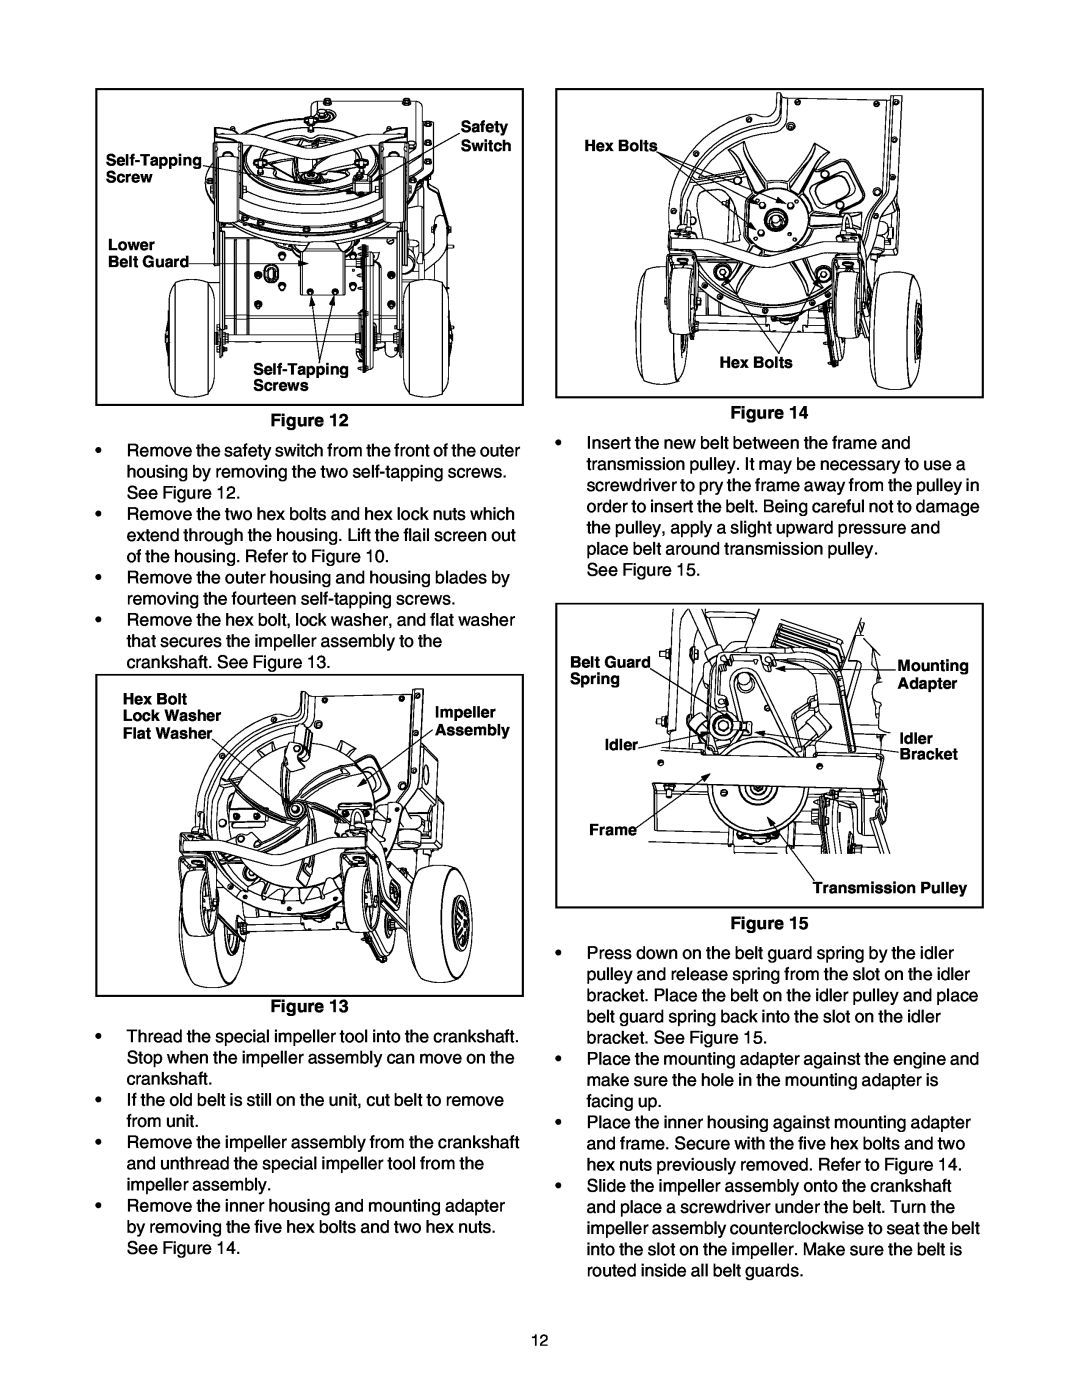 MTD 203 manual If the old belt is still on the unit, cut belt to remove from unit 